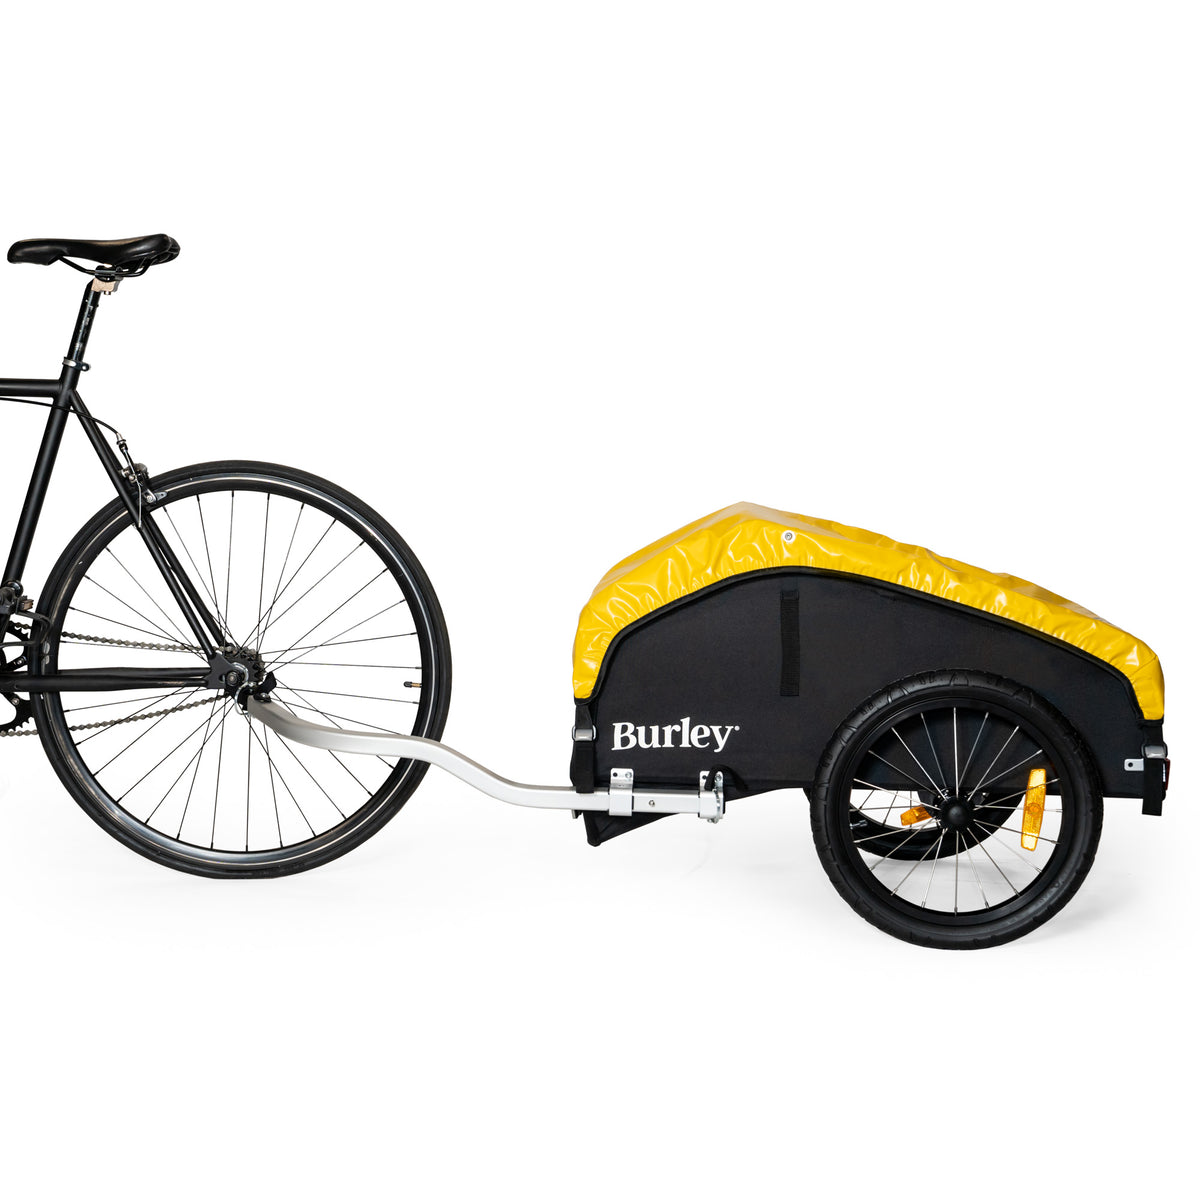 Burley Nomad Trailer Attached to Bike